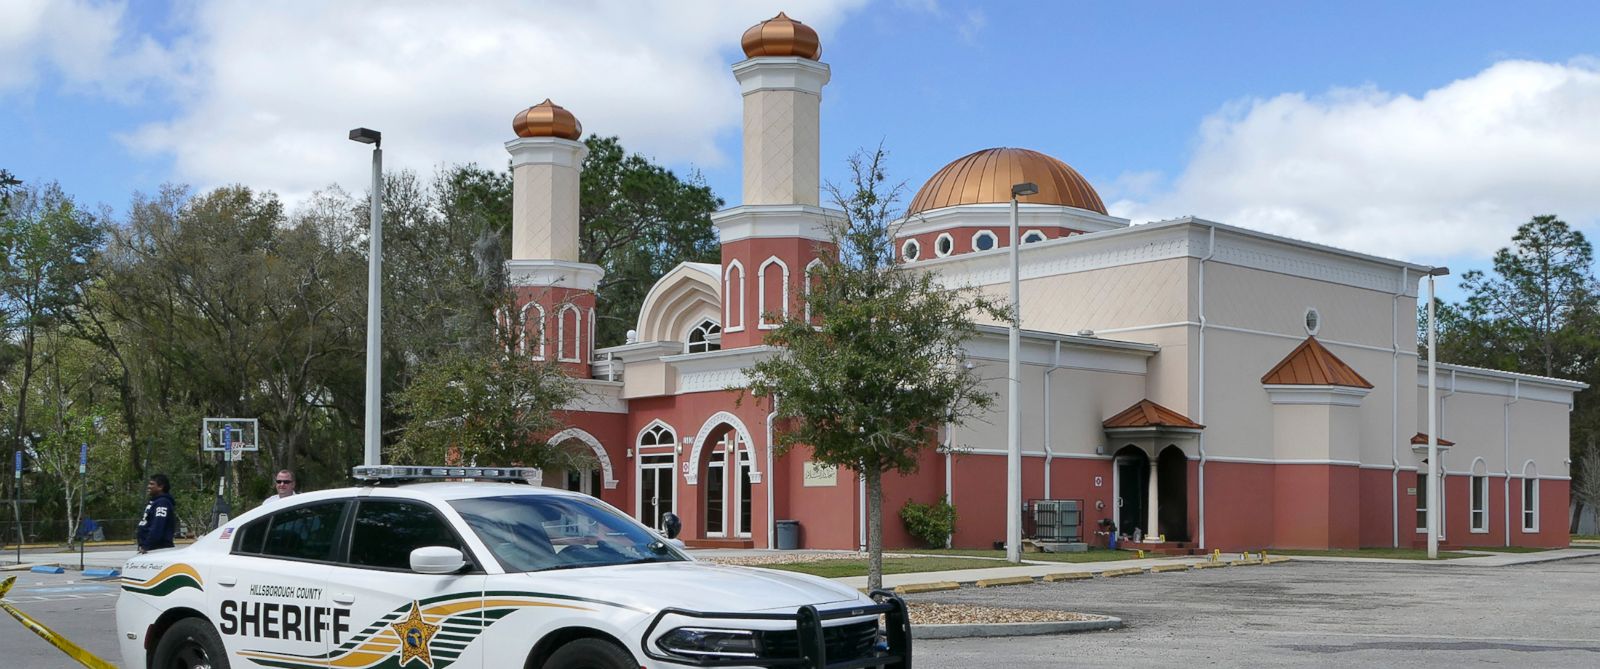 Mosque hate tampa arson crime investigated wmnf being area fire